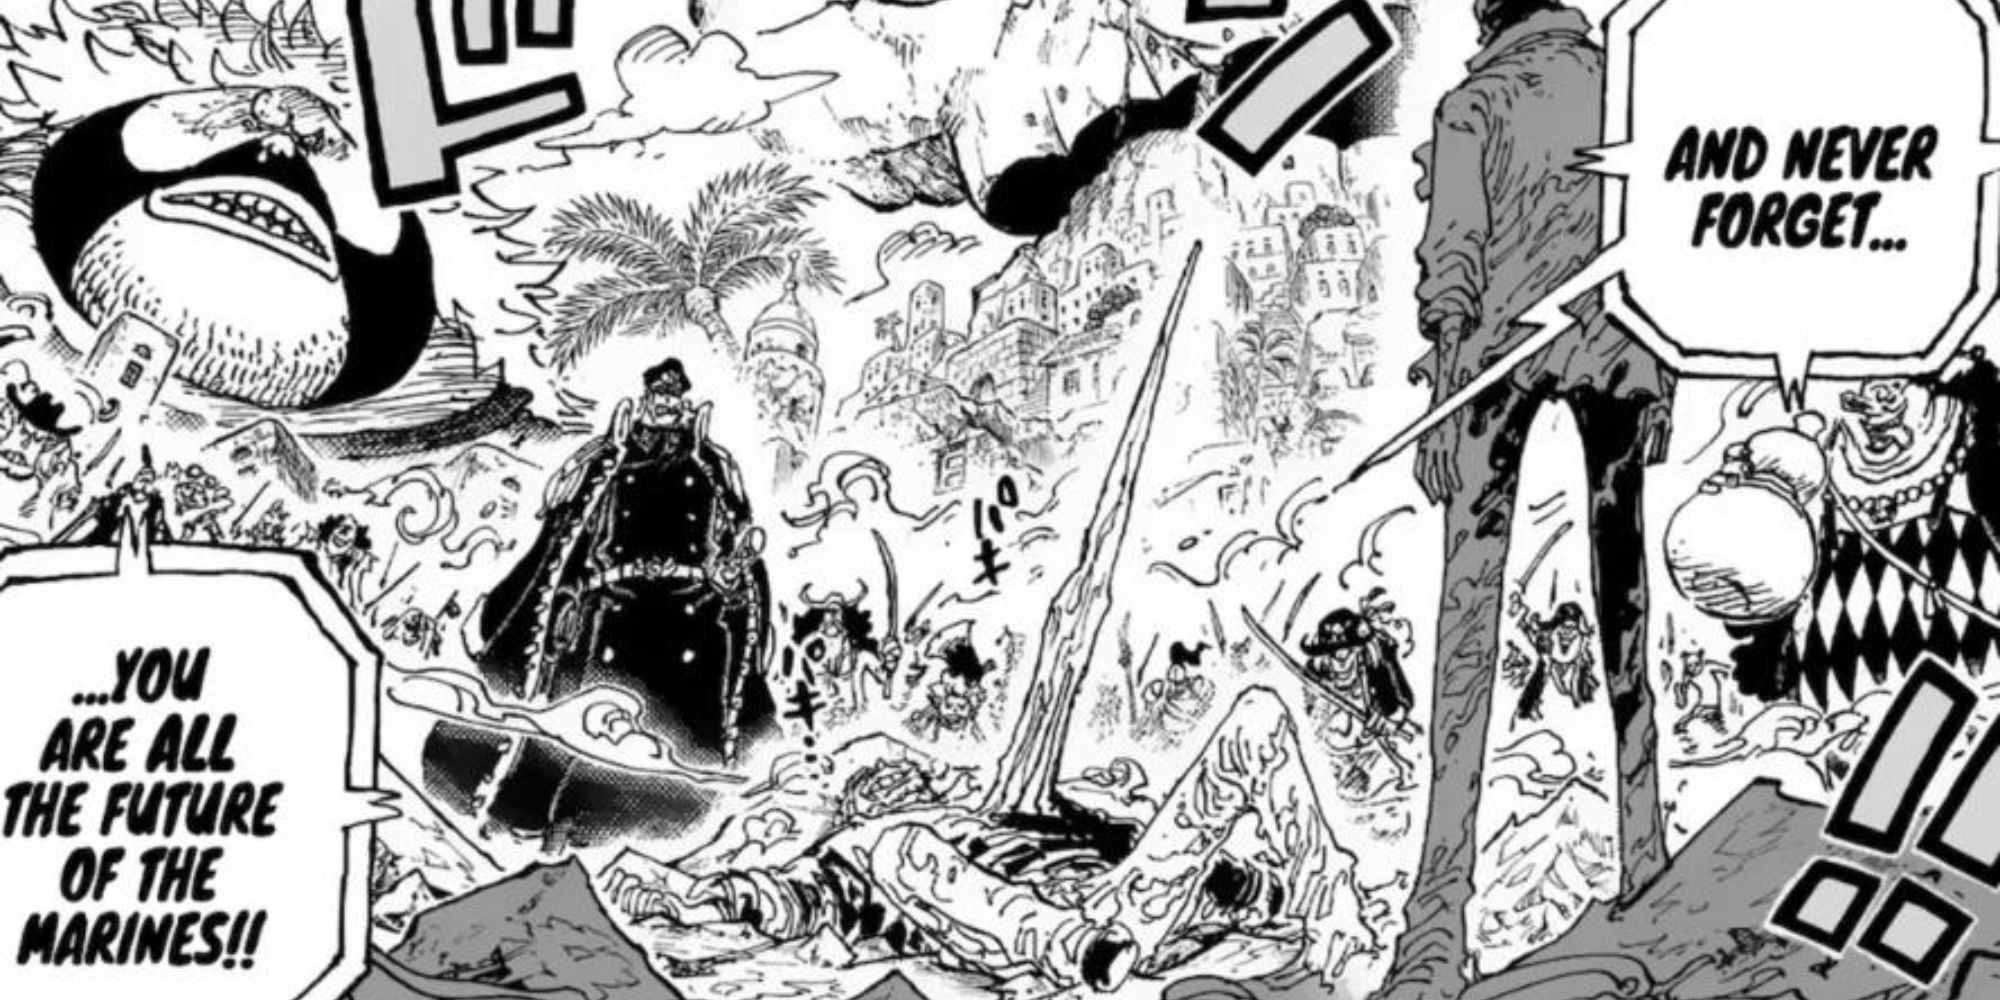 One Piece chapter 1089 shows the long-awaited return of the Straw